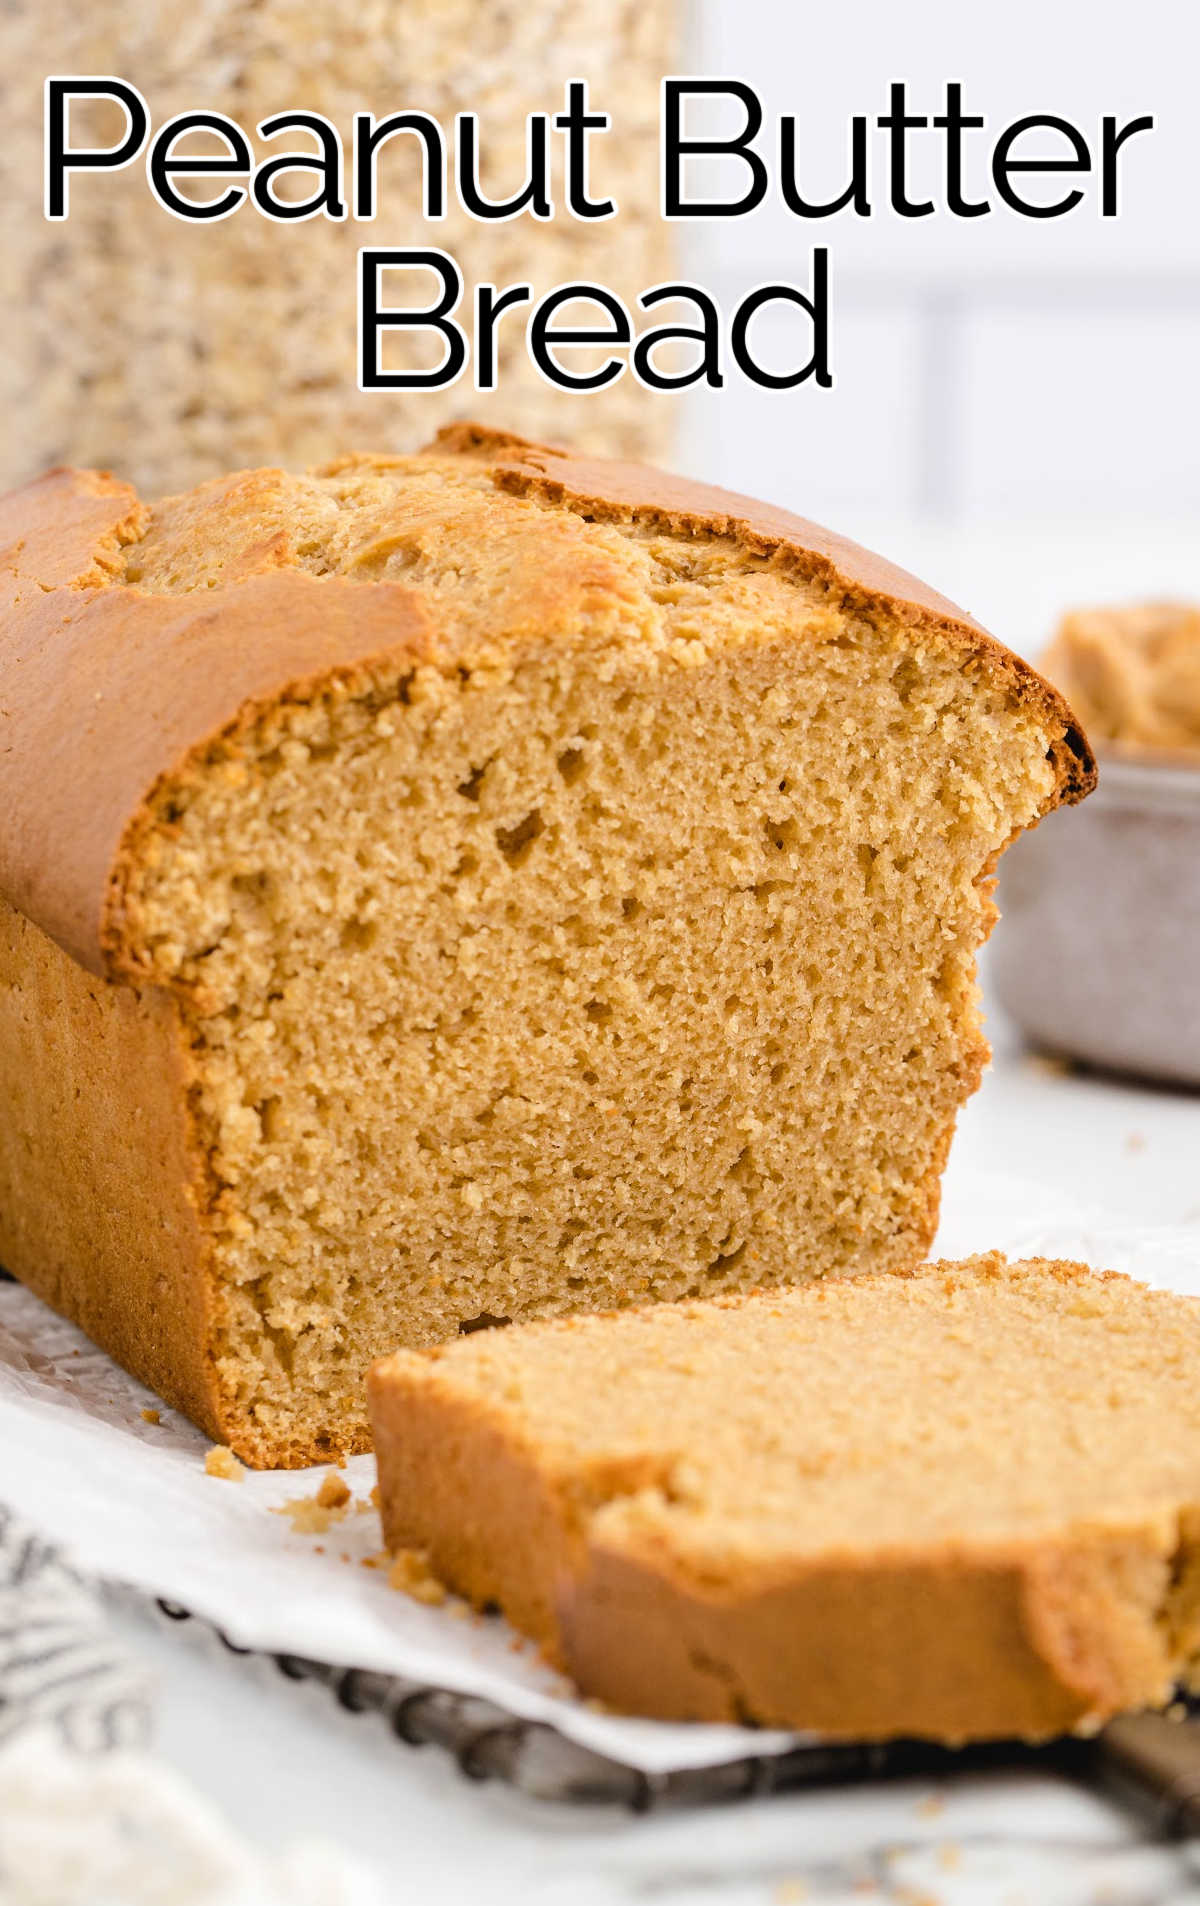 a loaf of bead with a slice cut off